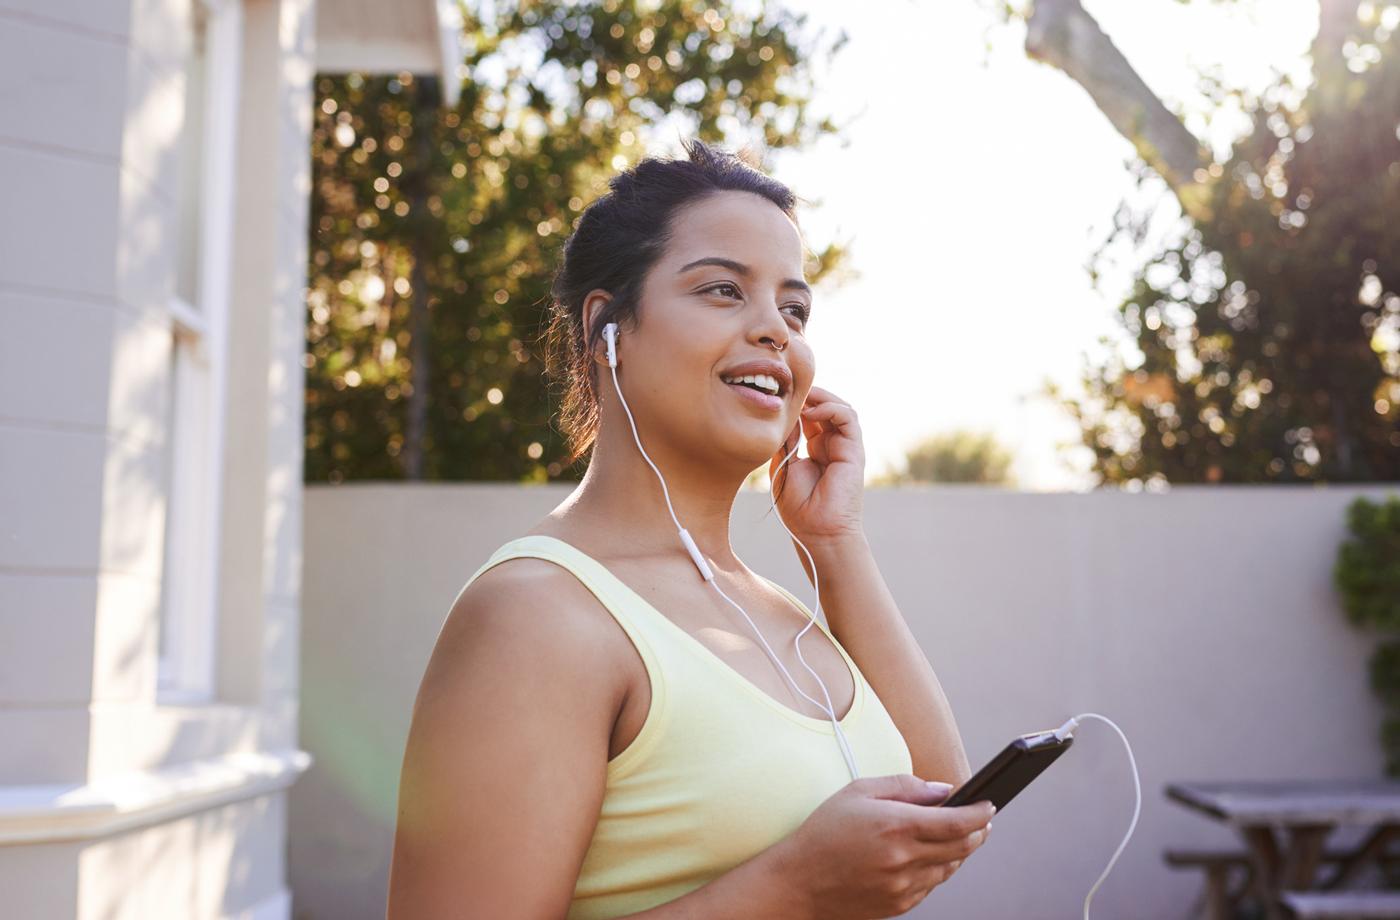 Add Audible to your list of free workout apps